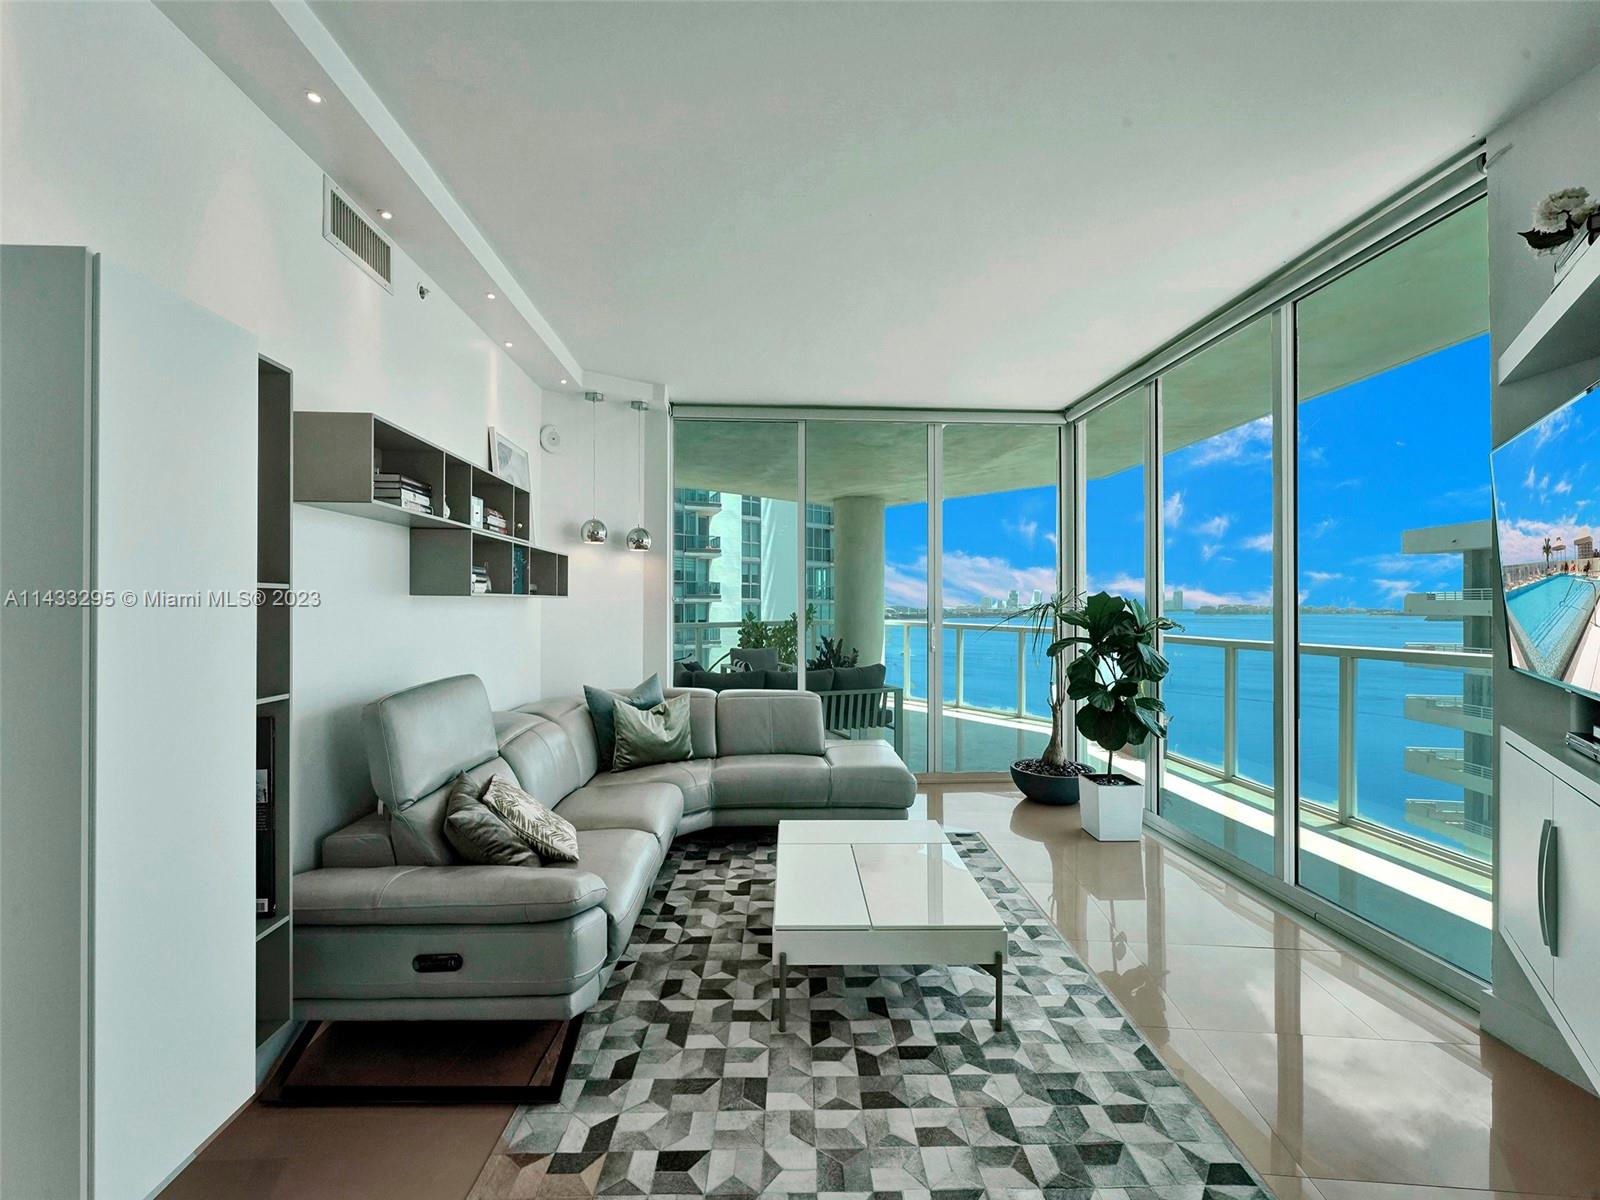 Stunning corner unit at The Emerald in the heart of Brickell! 
Enjoy breathtaking bay and city views from the 15th floor. Spacious layout, modern finishes, and abundant natural light. Kitchen and bathroom remodeled. Many upgrades, like new!. Beautiful porcelain floors. Oversized (447 Sq Ft) terrace overlooking the bay.
Electric window treatment and several upgrades make this one of the best units in the building. Premium amenities including rooftop pool, fitness center, business center, community room, bike room and concierge service. Steps from dining, shopping, and entertainment. Urban living at its finest!